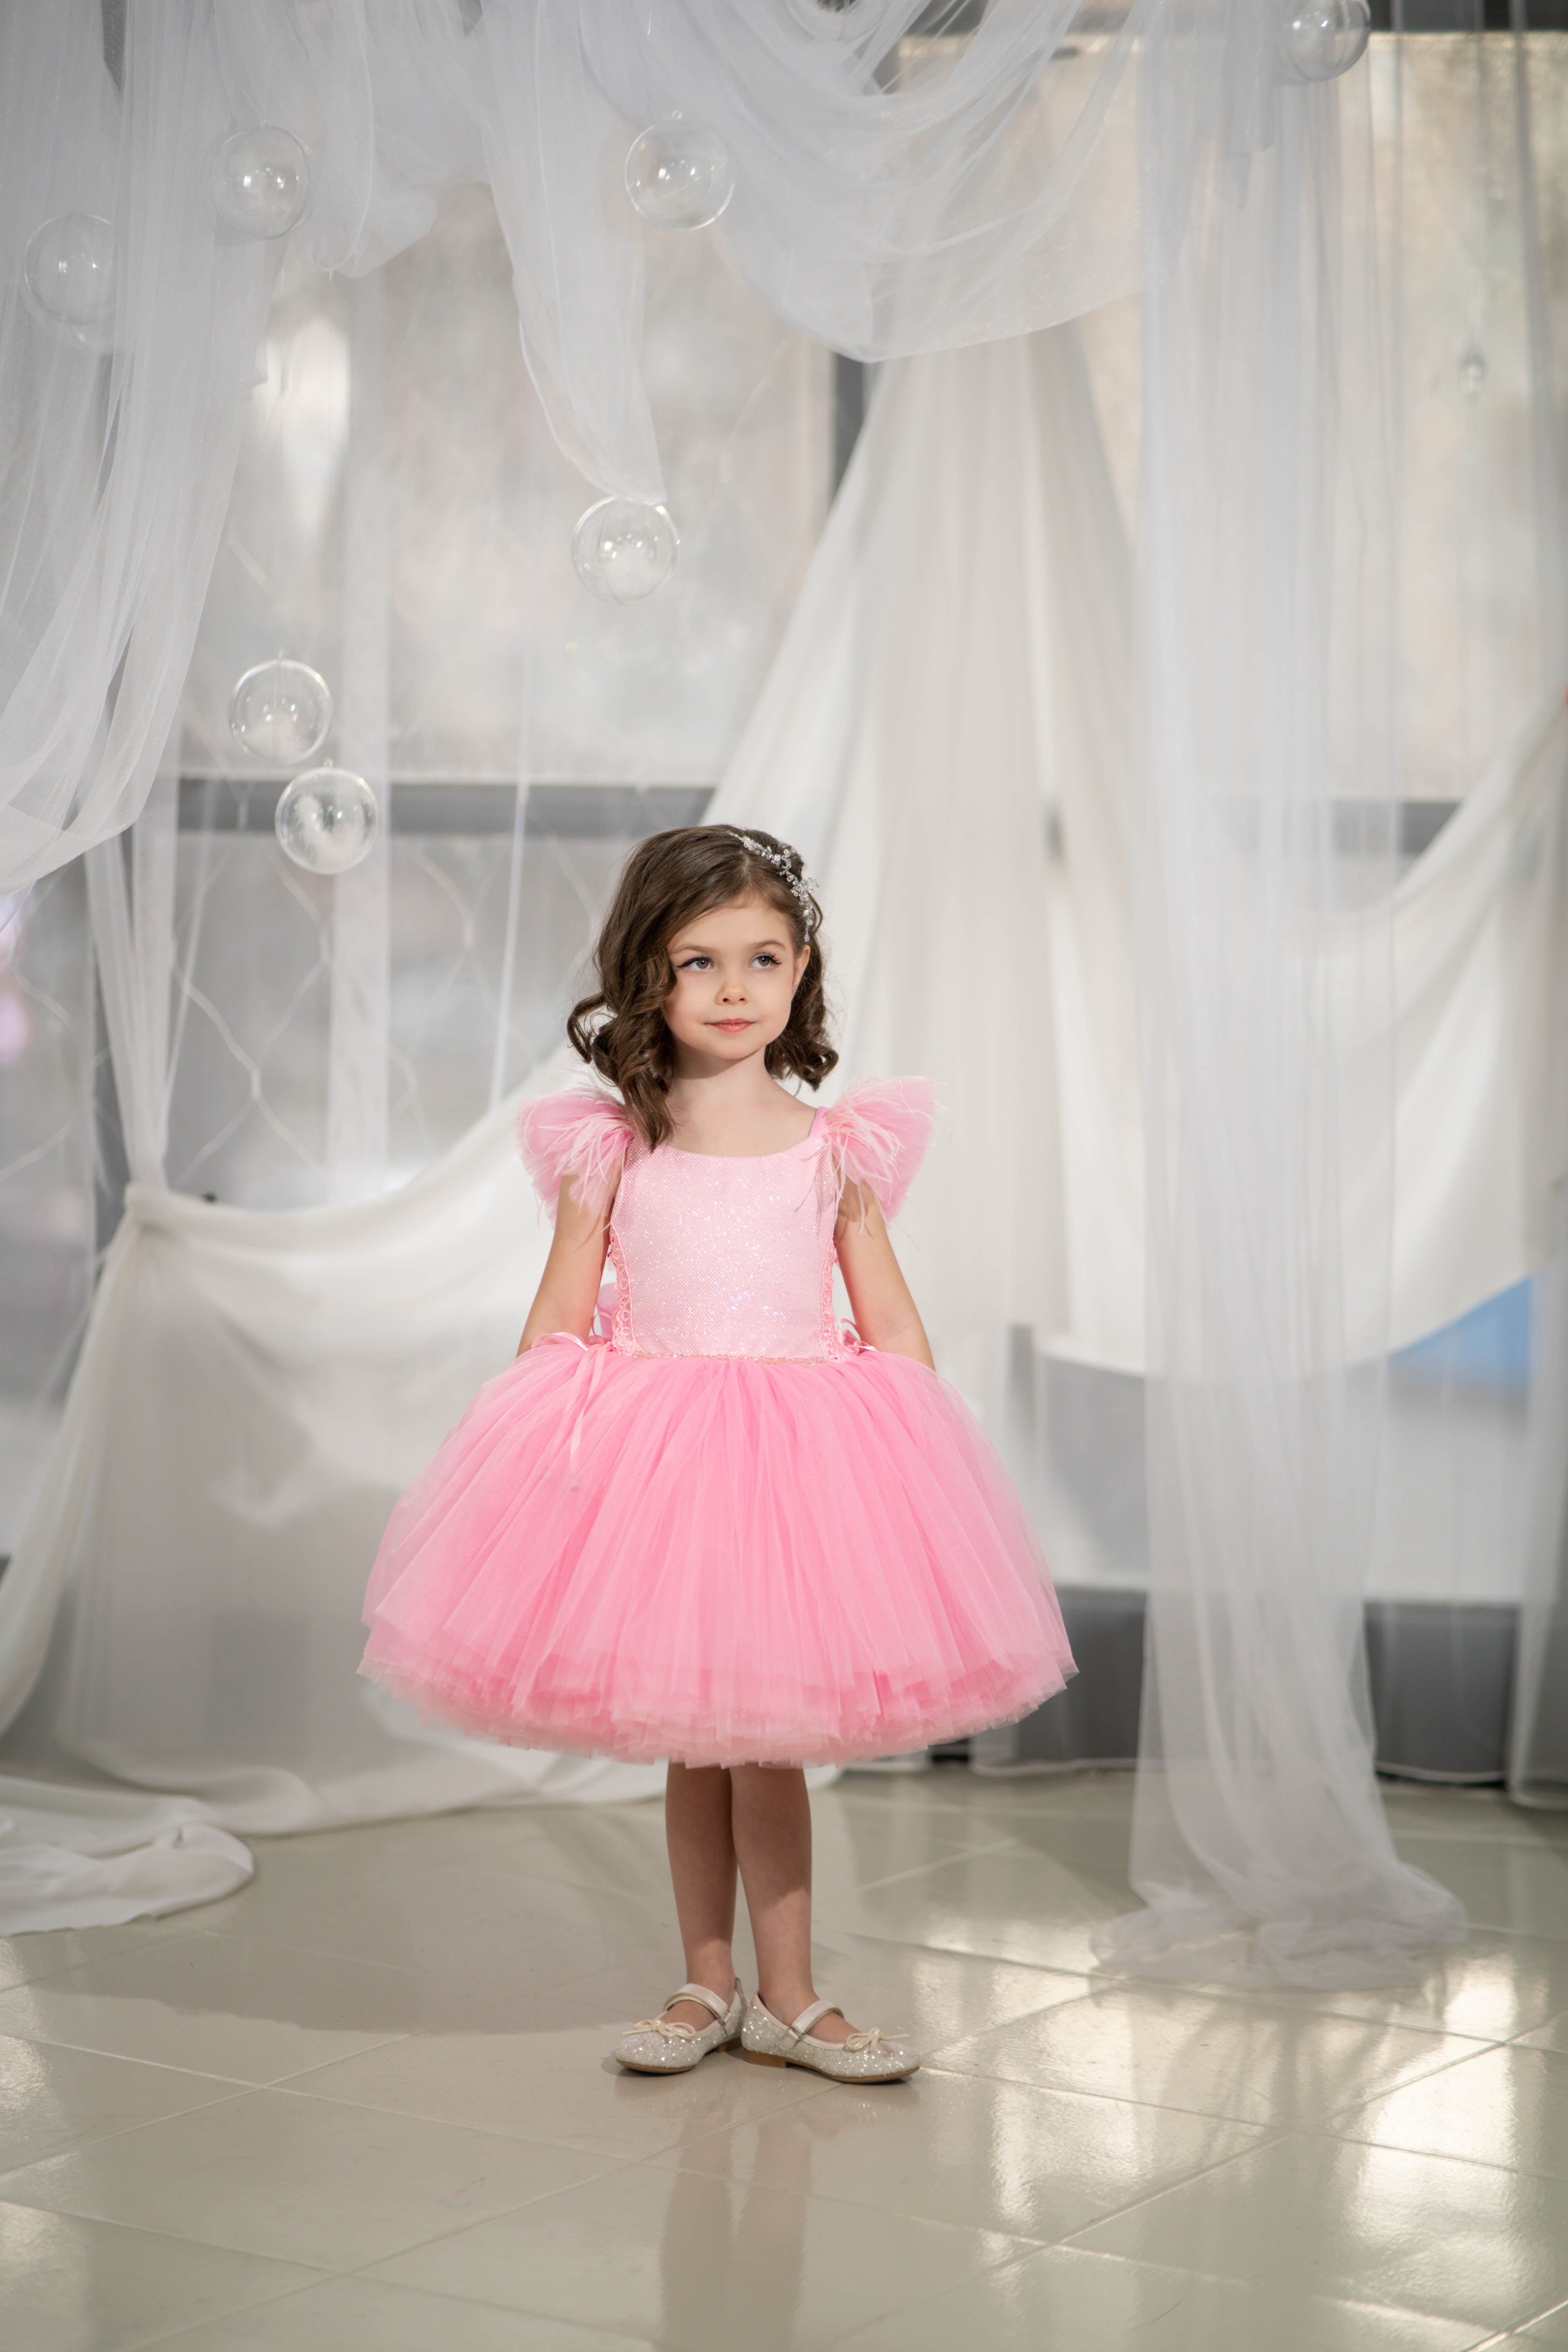 Princess Dress (Size 1-2, Pink, In Stock).